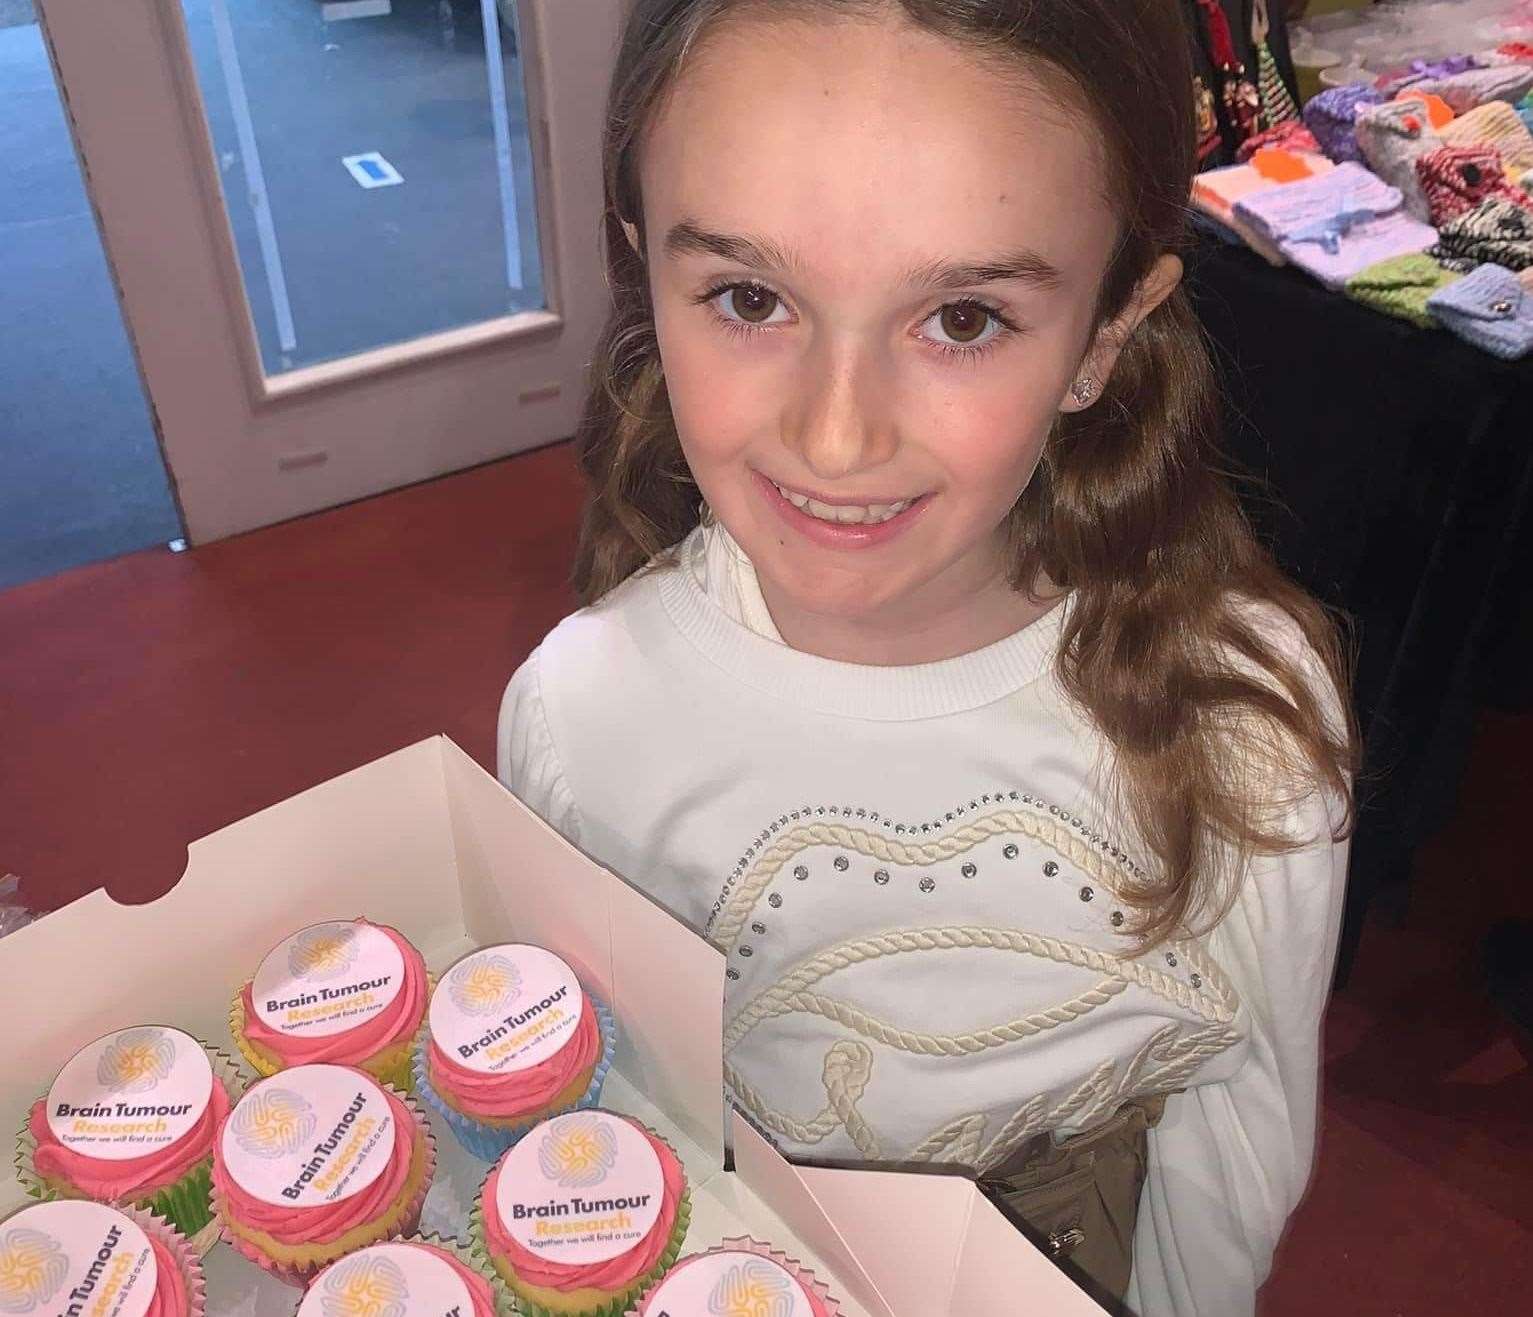 Layla raising funds for Brain Tumour Research